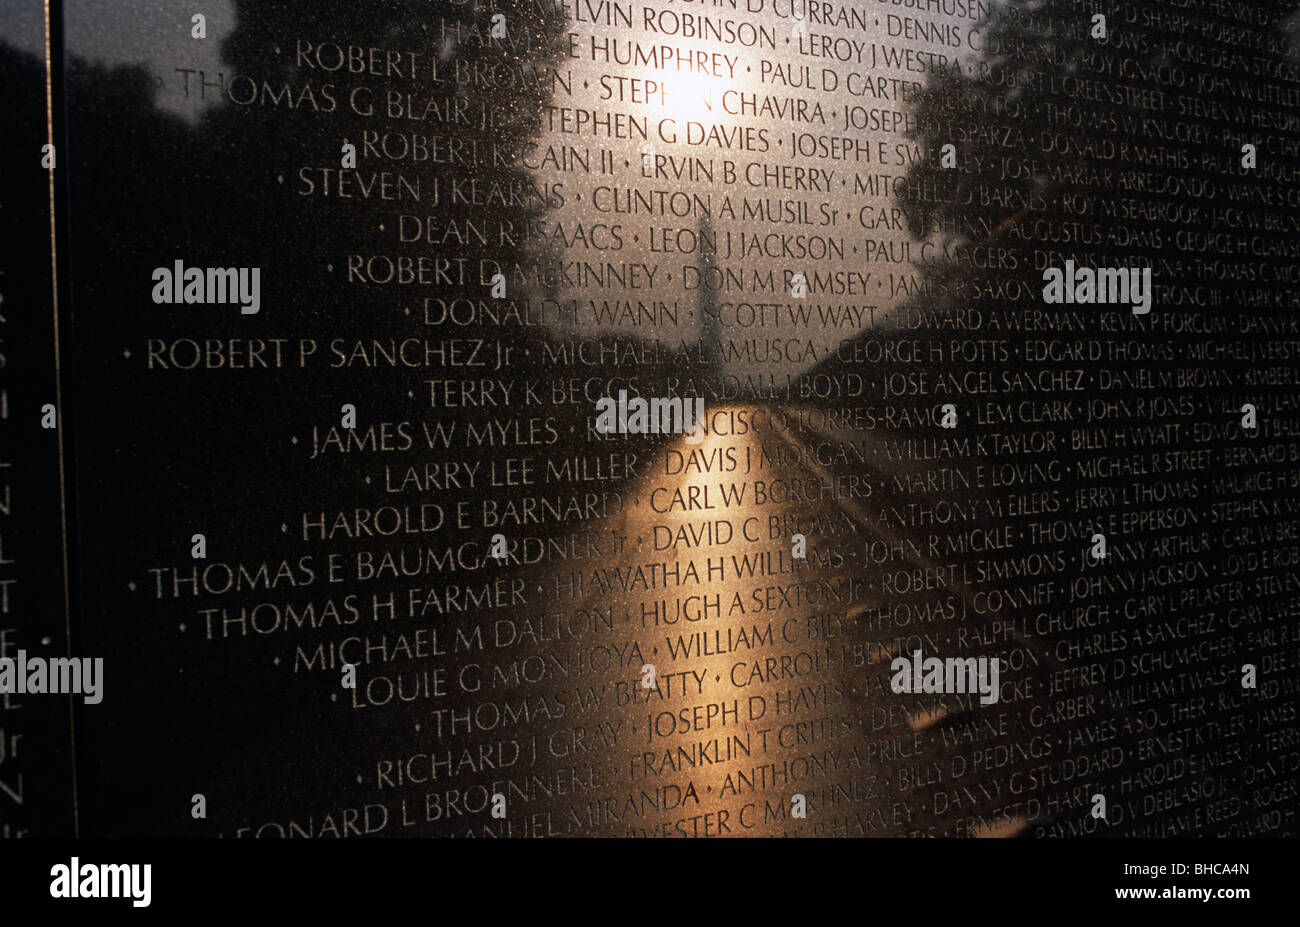 The names of those killed at the Washington DC Vietnam Memorial are picked out against a rising above the Washington Memorial Stock Photo